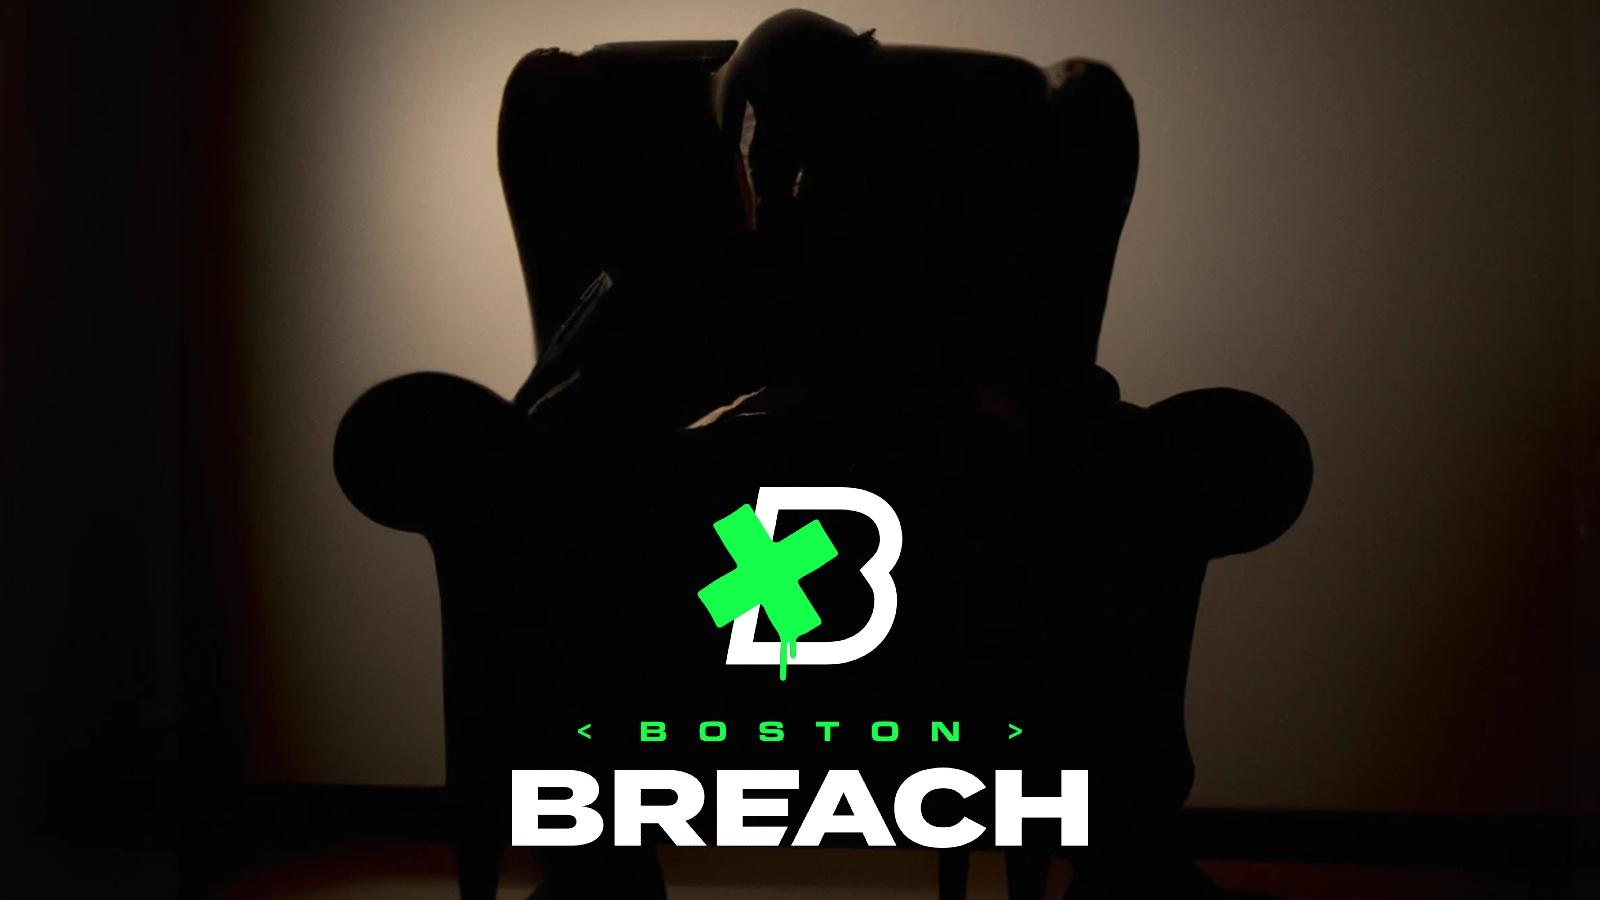 Silhouette of a man in an armchair with a Boston Breach logo in the middle